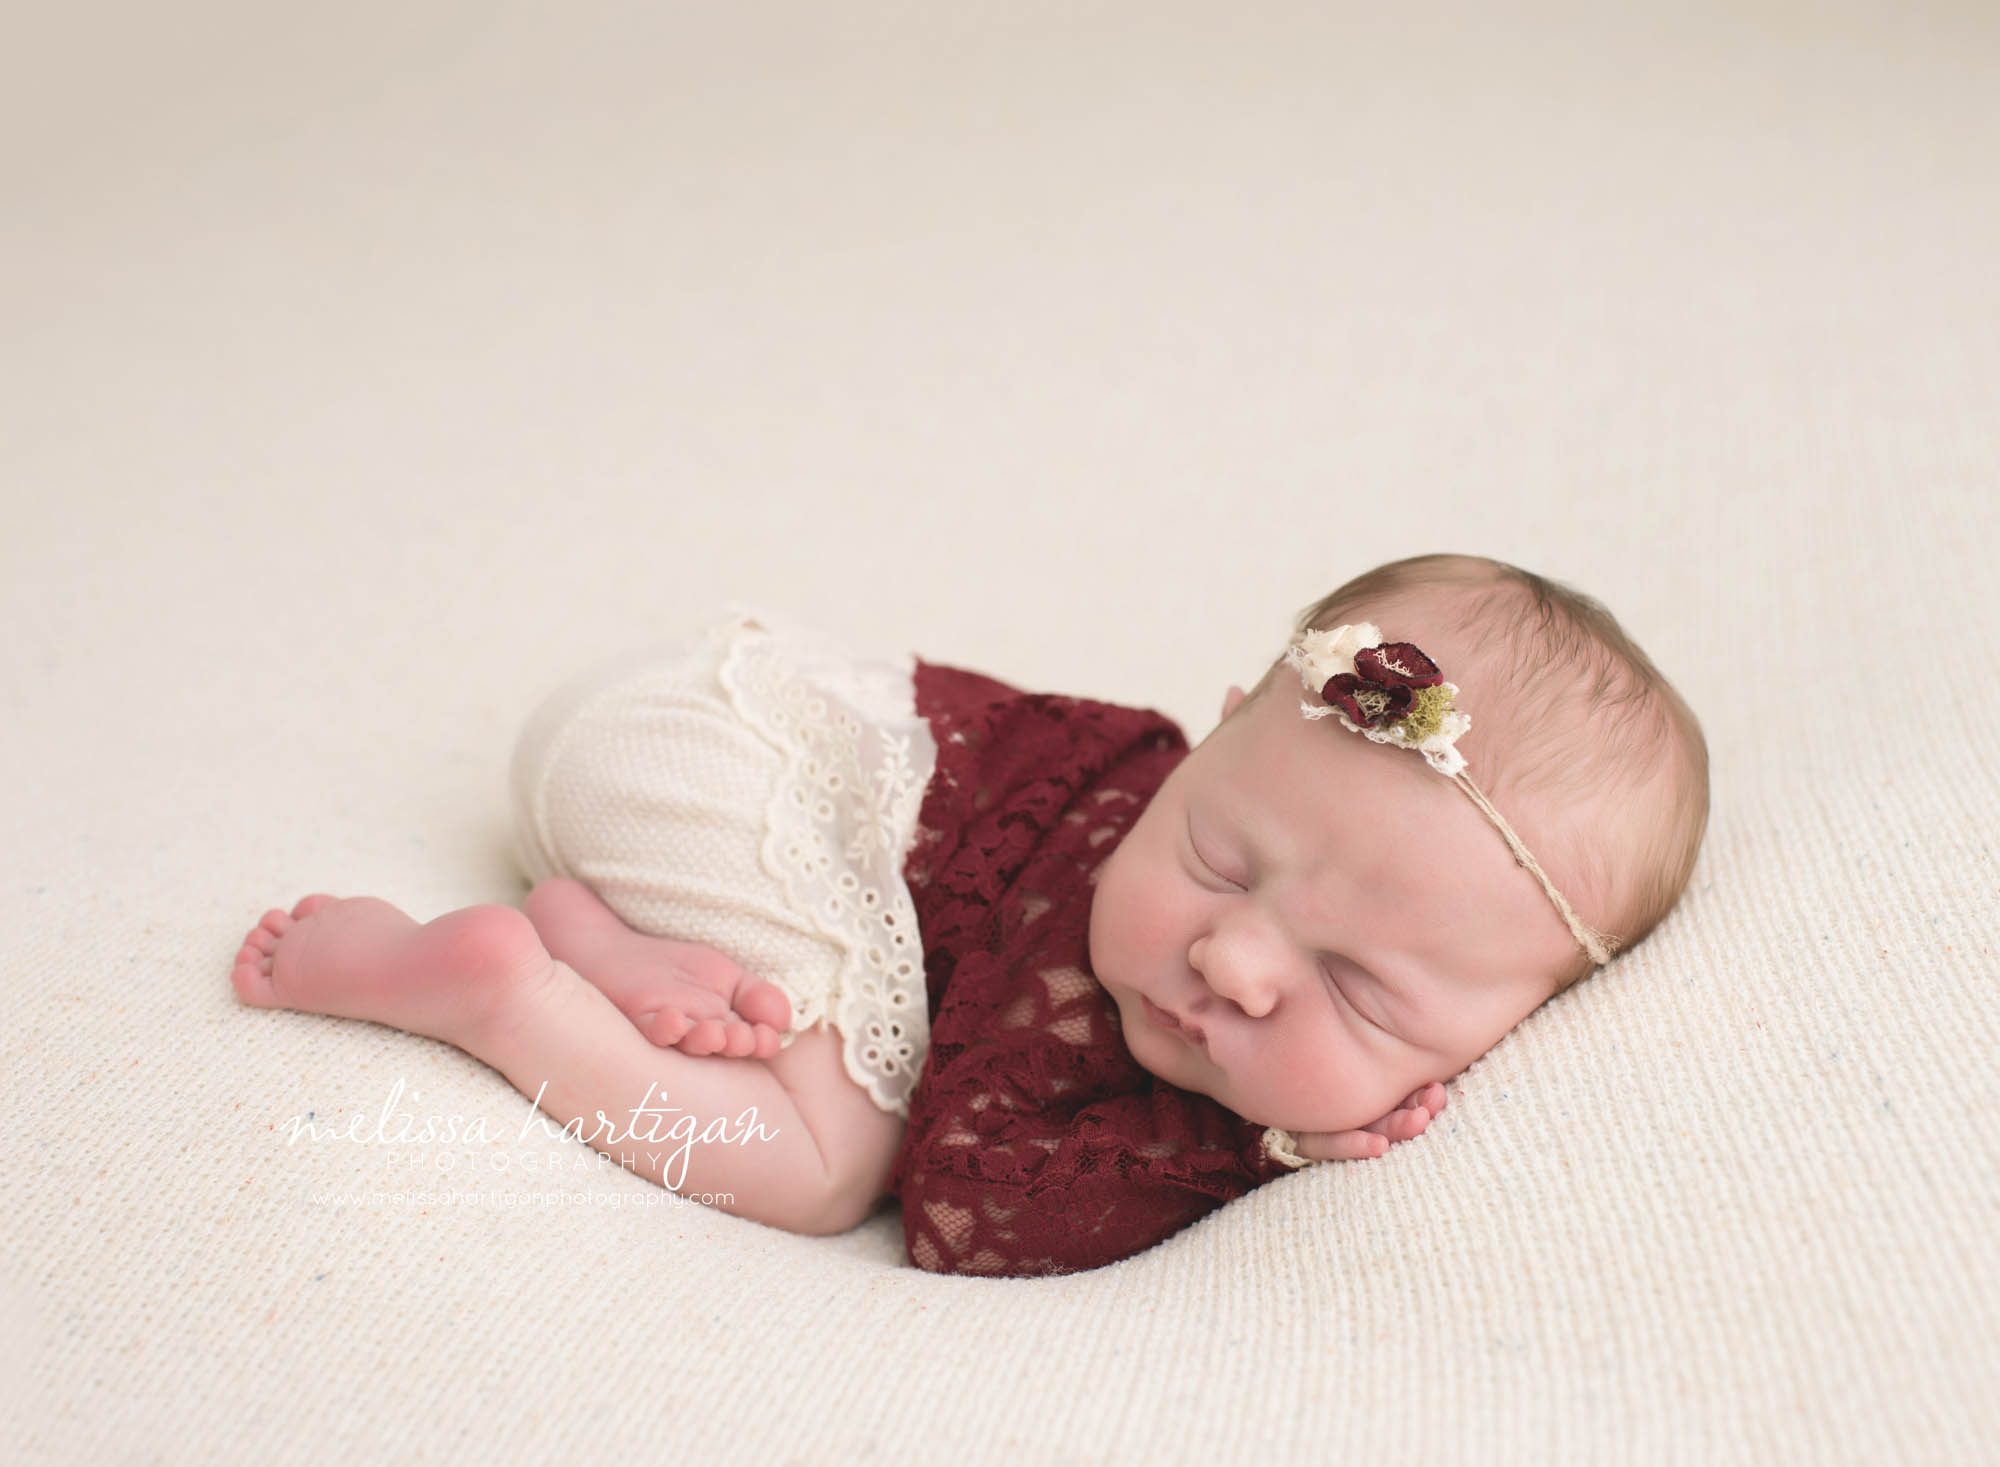 Melissa Hartigan Photography Connecticut Newborn Photographer Coventry Ct Middlefield CT baby Fairfield county Baby girl cream headband with maroon flowers maroon lace top cream lace shorts sleeping head on hands CT newborn session